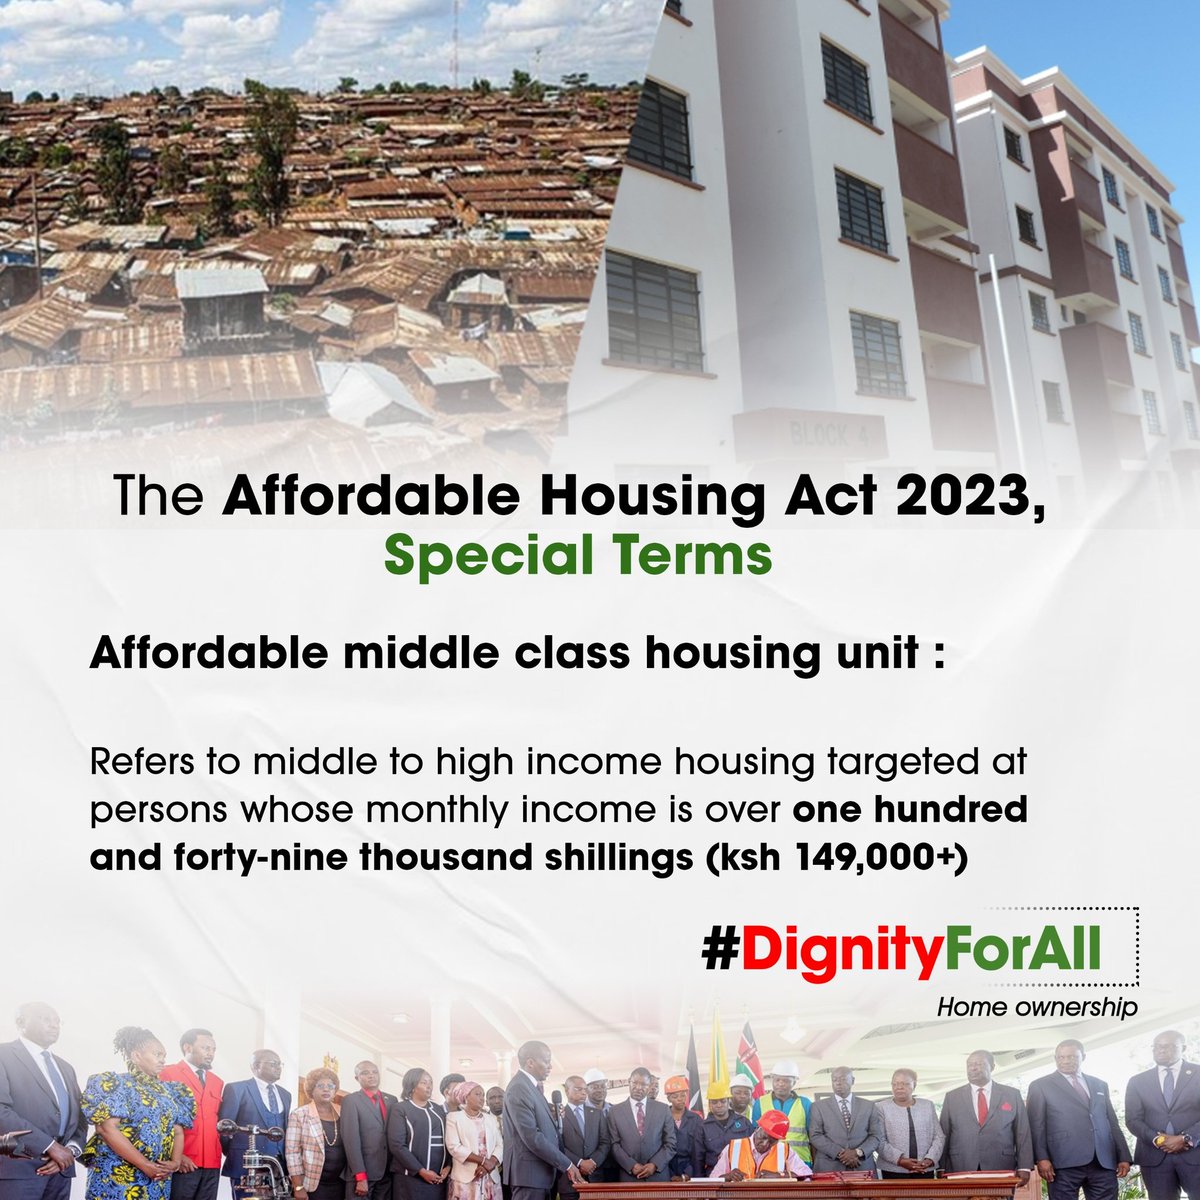 . #DignityForAll and affordable middle class housing unit refers to Middle to High Income housing target at persons whose monthly income is over 100 and 149,000 shilling. 
Home ownership